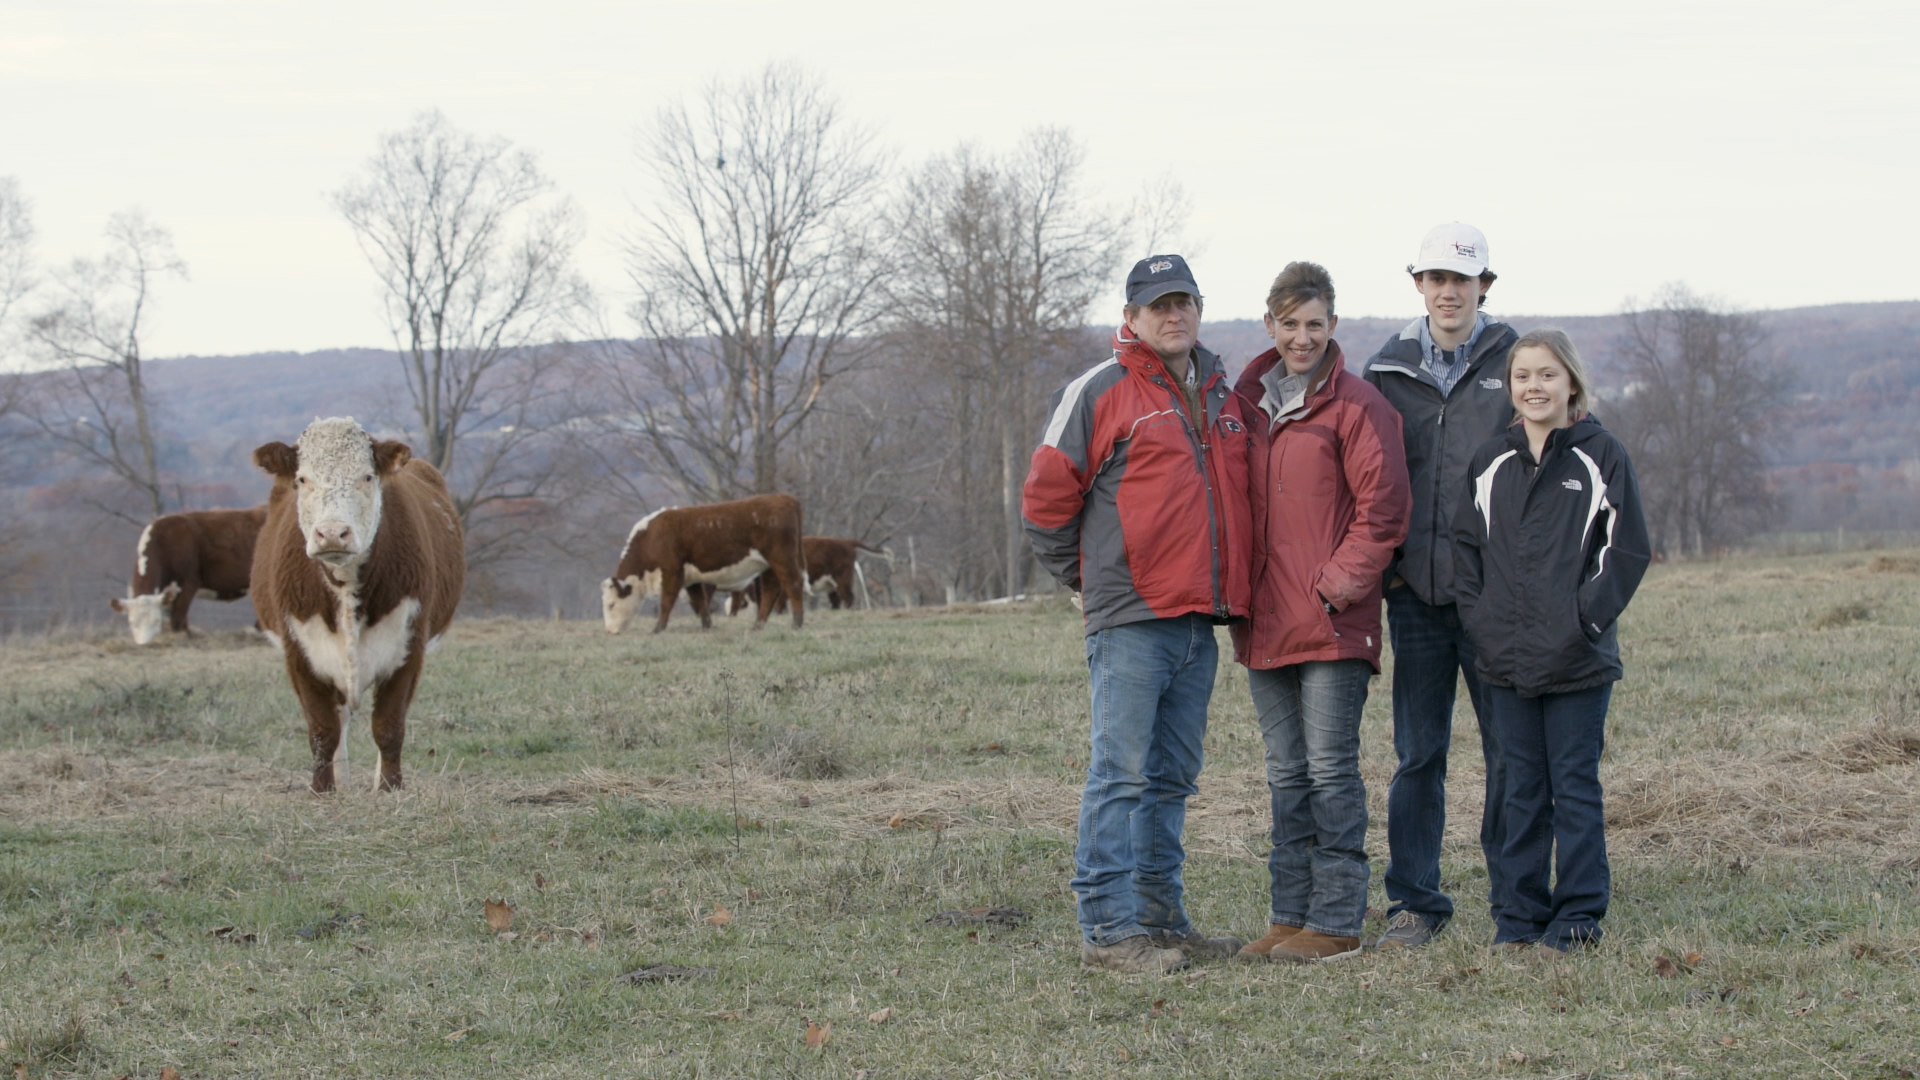 Pennsylvania Beef Producer Shares Story to Celebrate National Ag Day